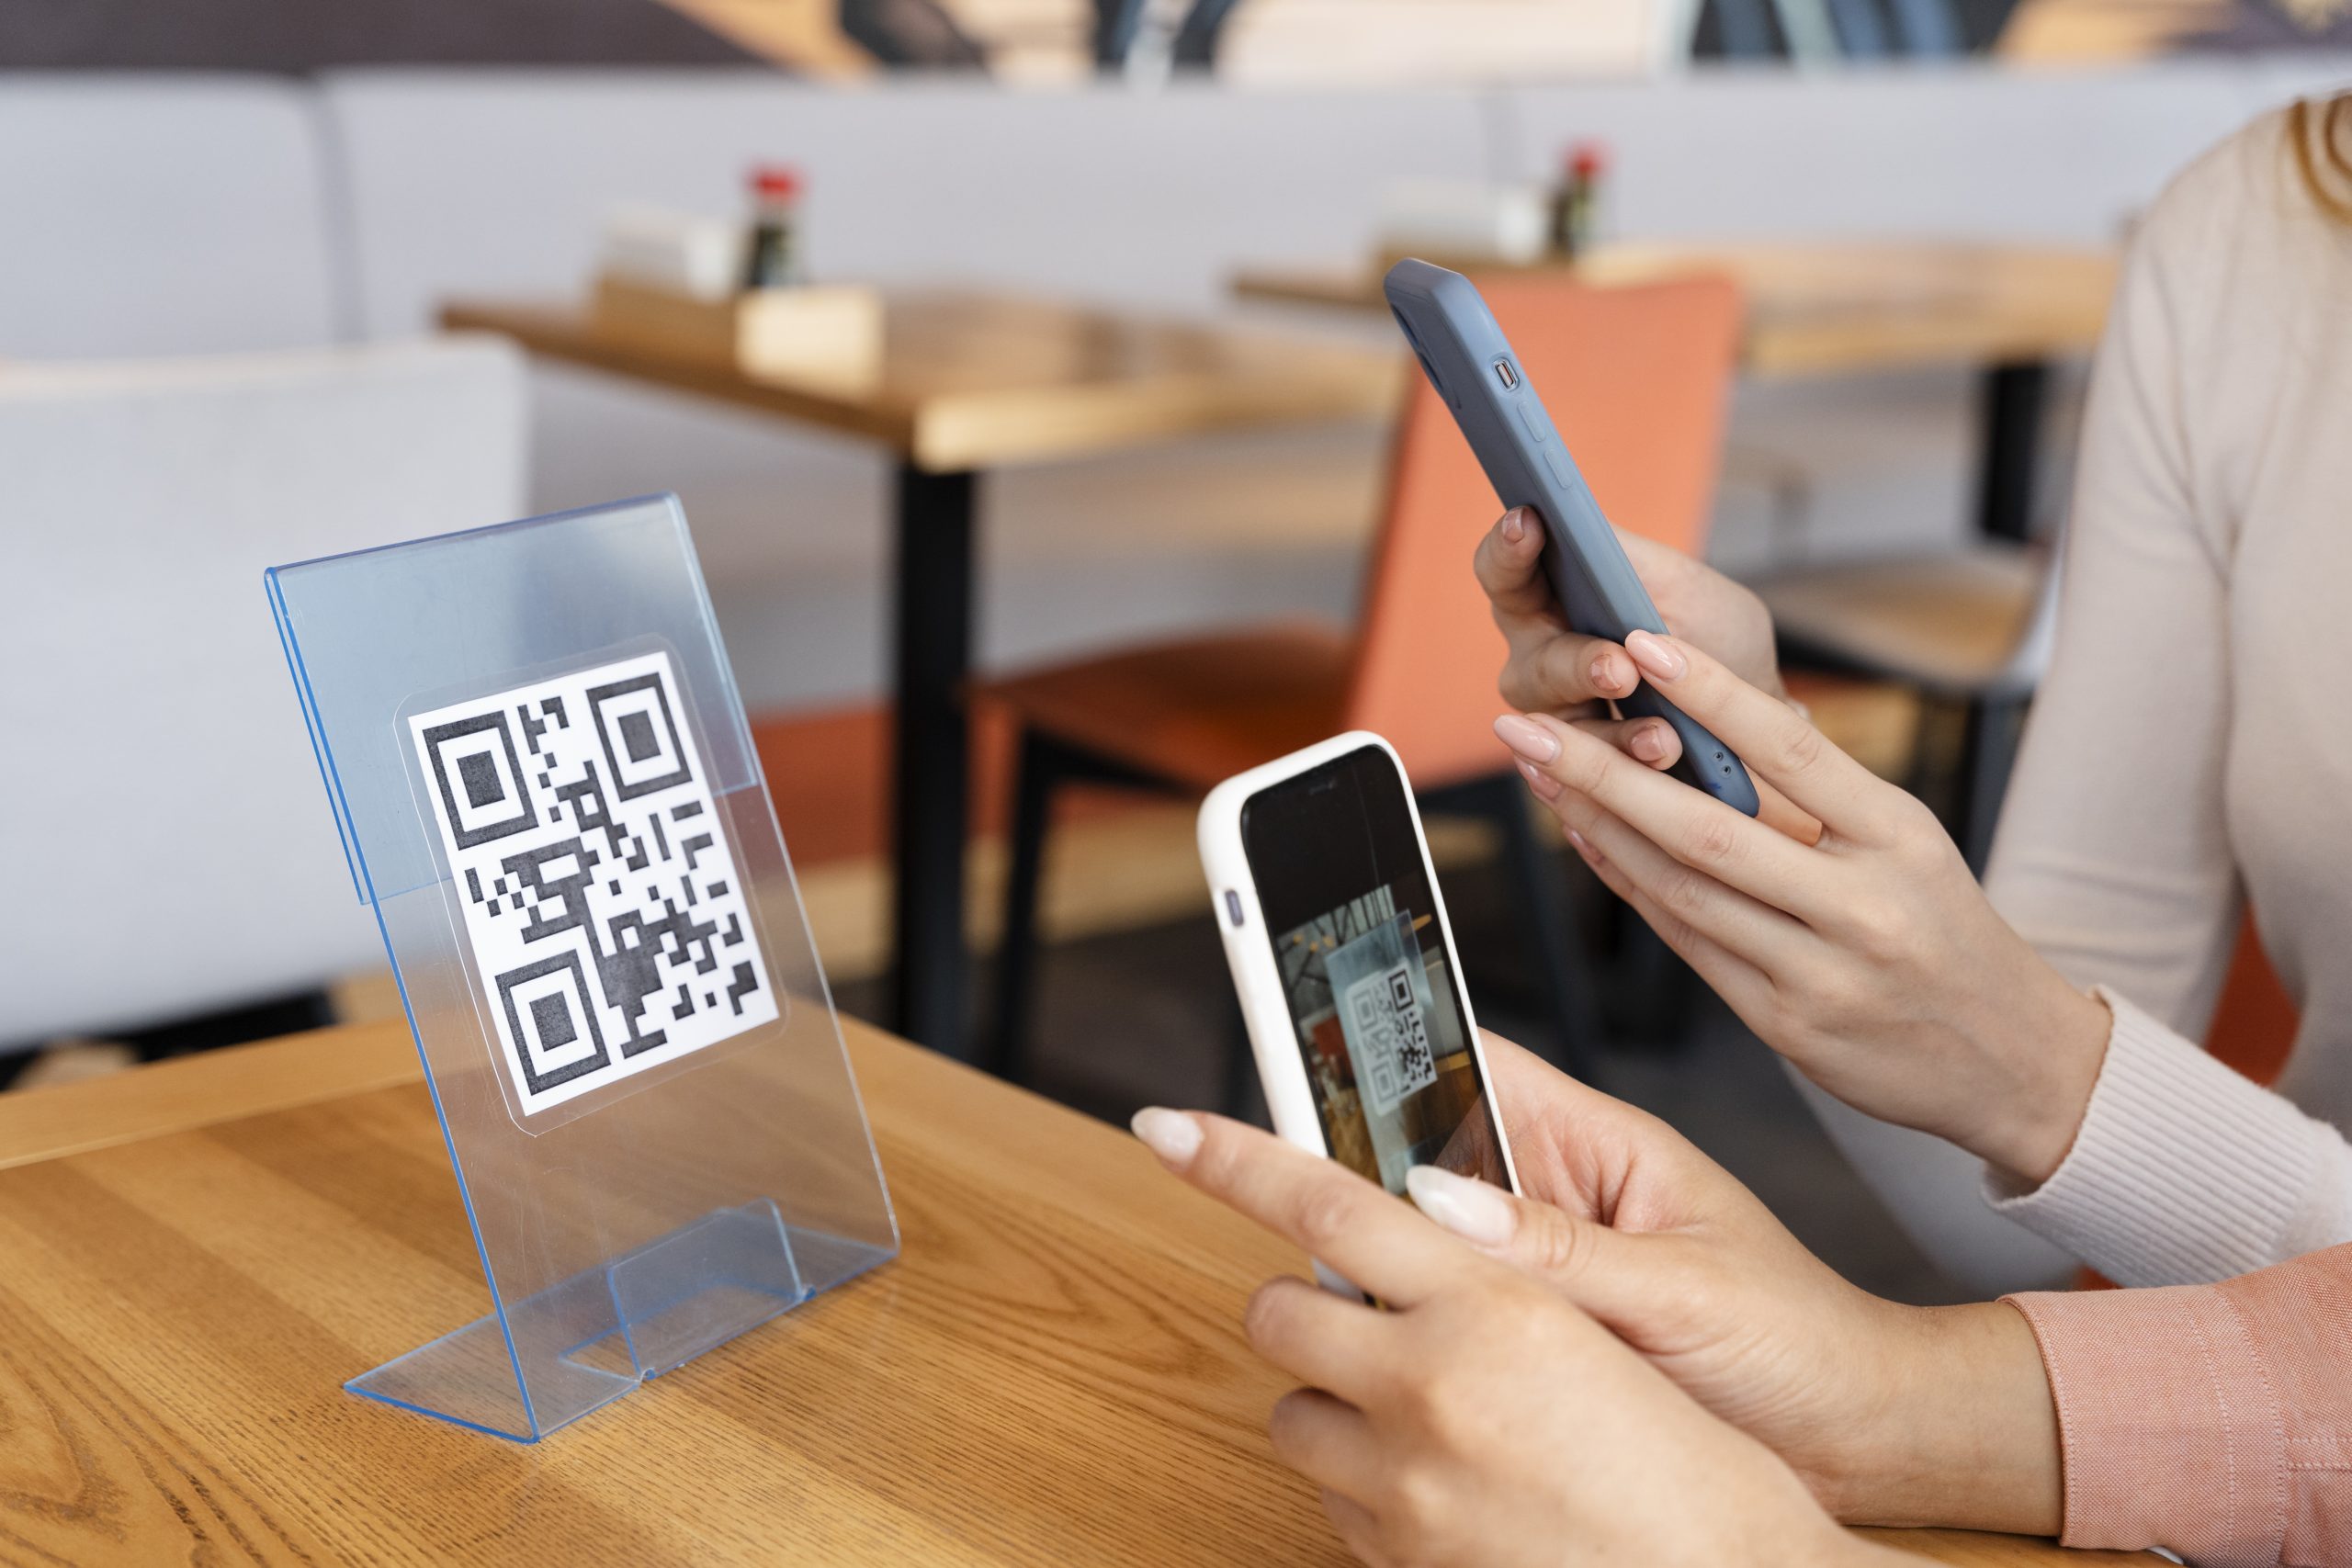 Two people scanning a QR at a restaurant